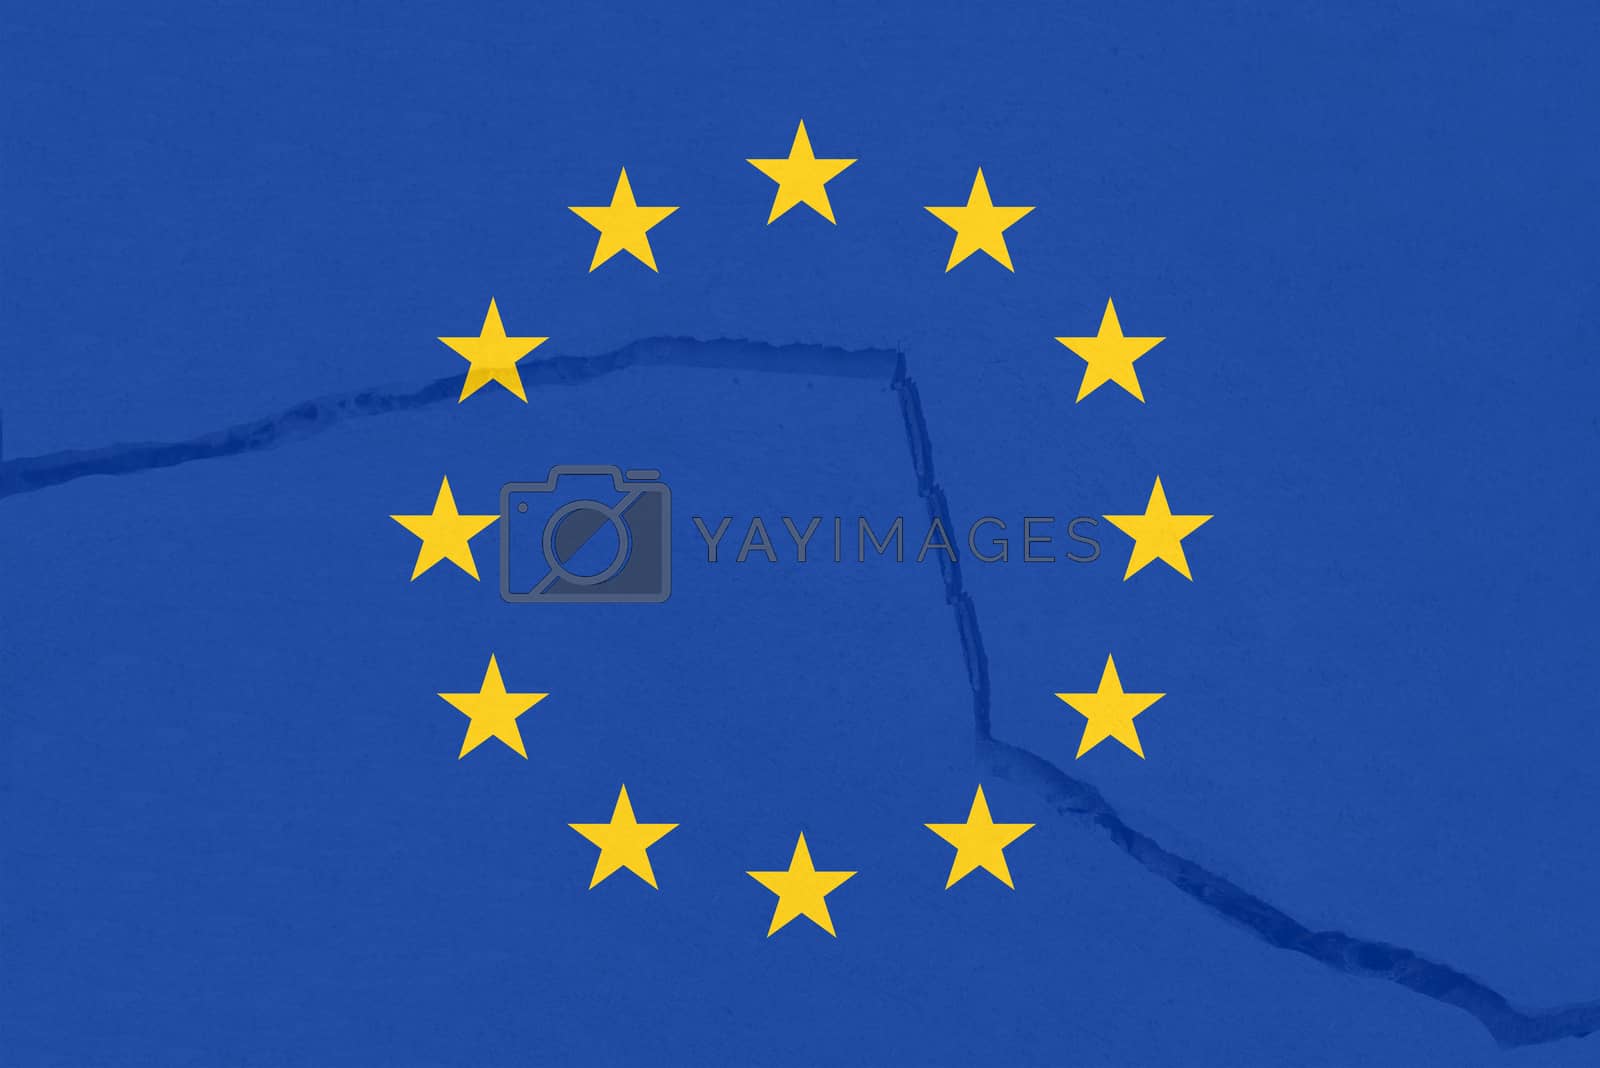 Royalty free image of Europe is breaking, symbolic by HdDesign